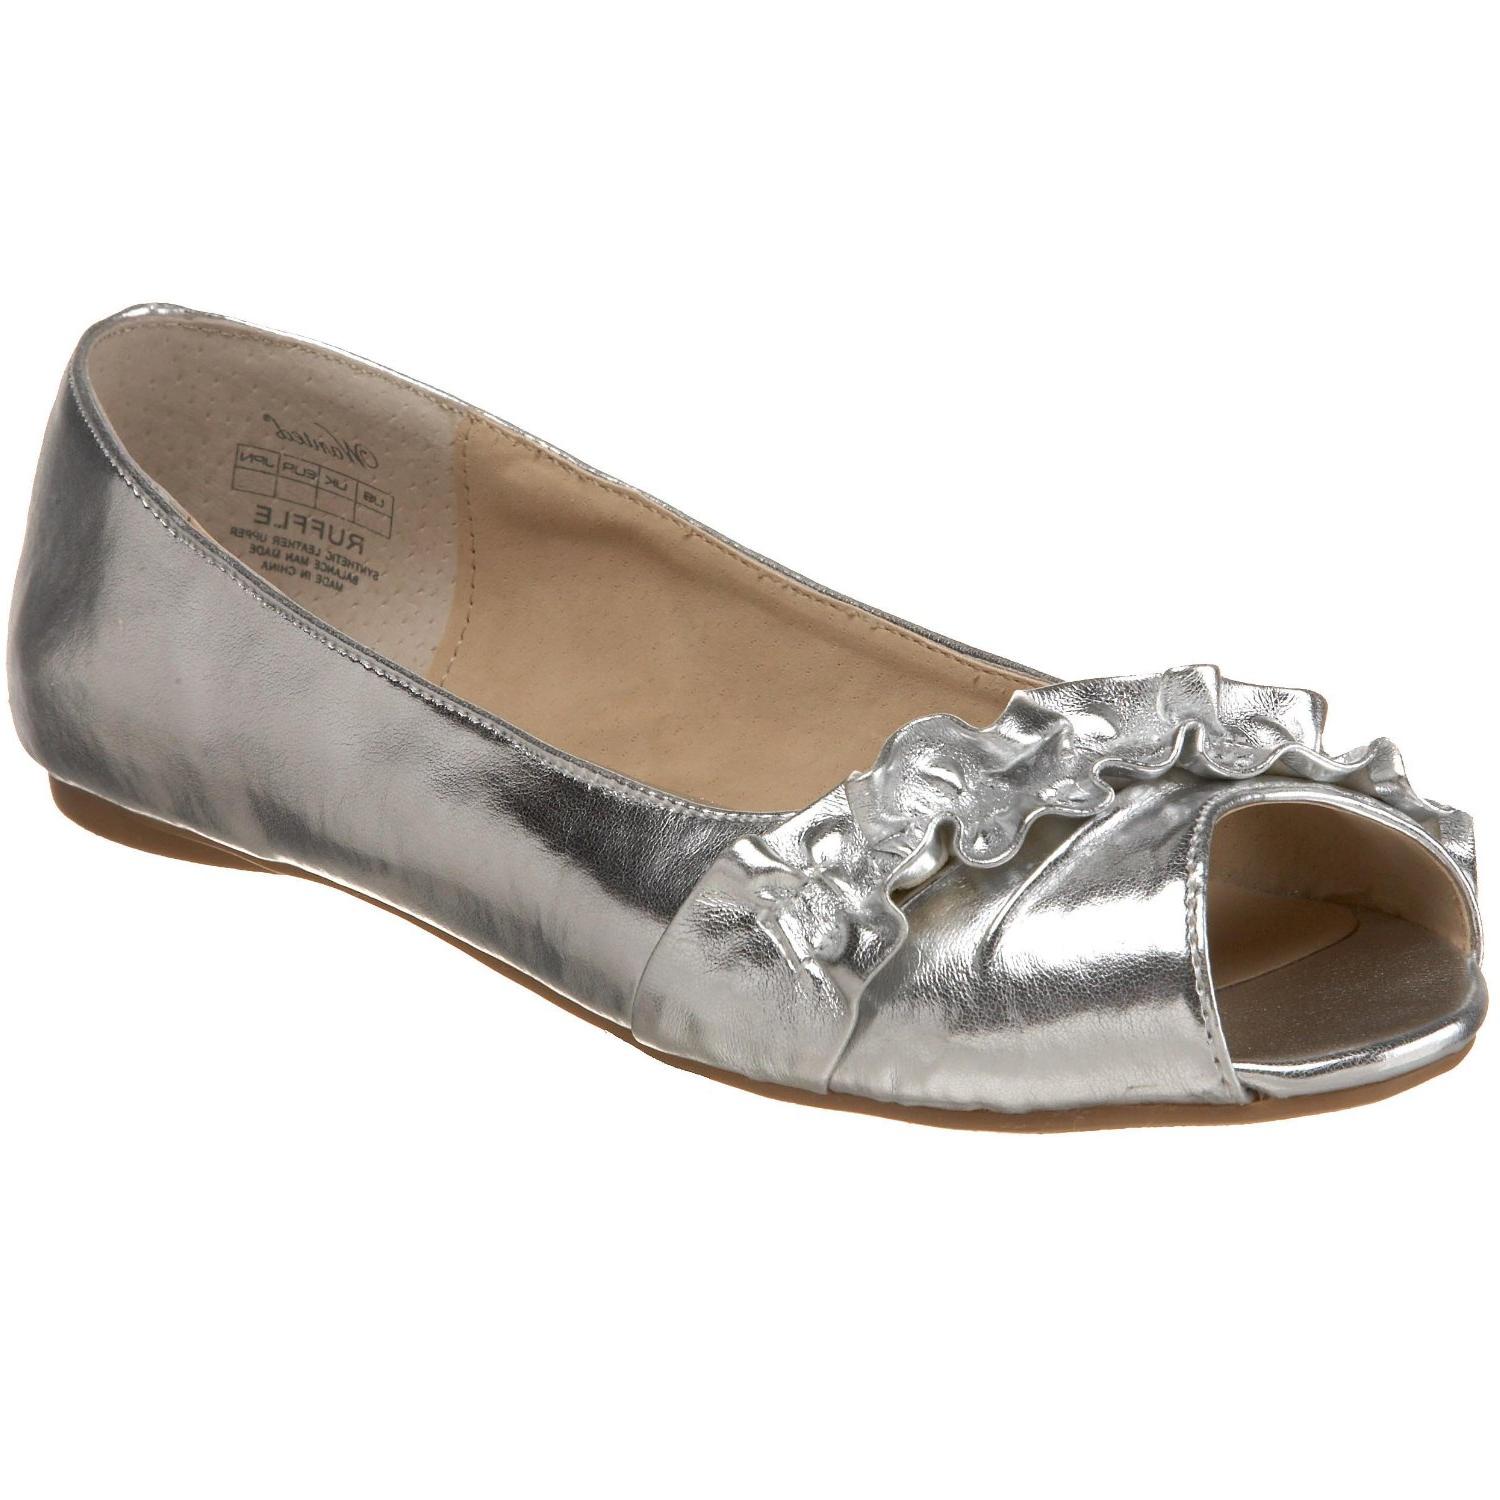 Looking for silver flats for